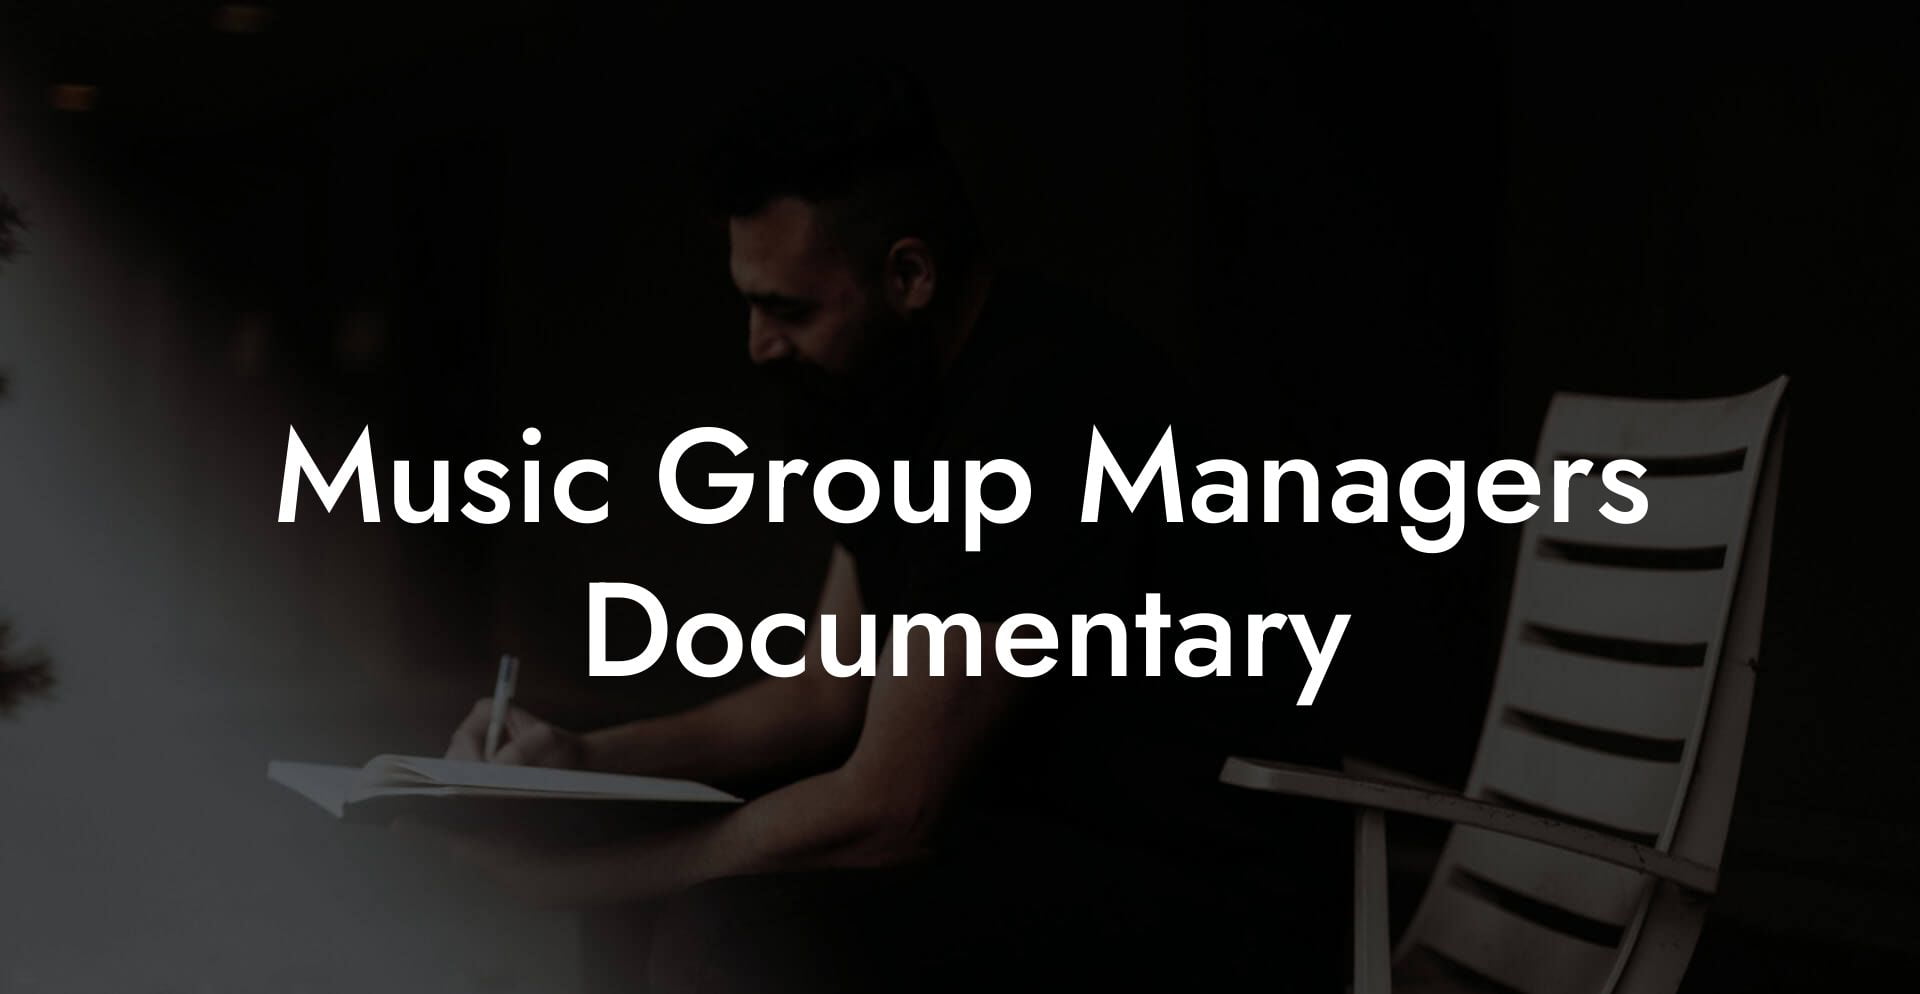 Music Group Managers Documentary